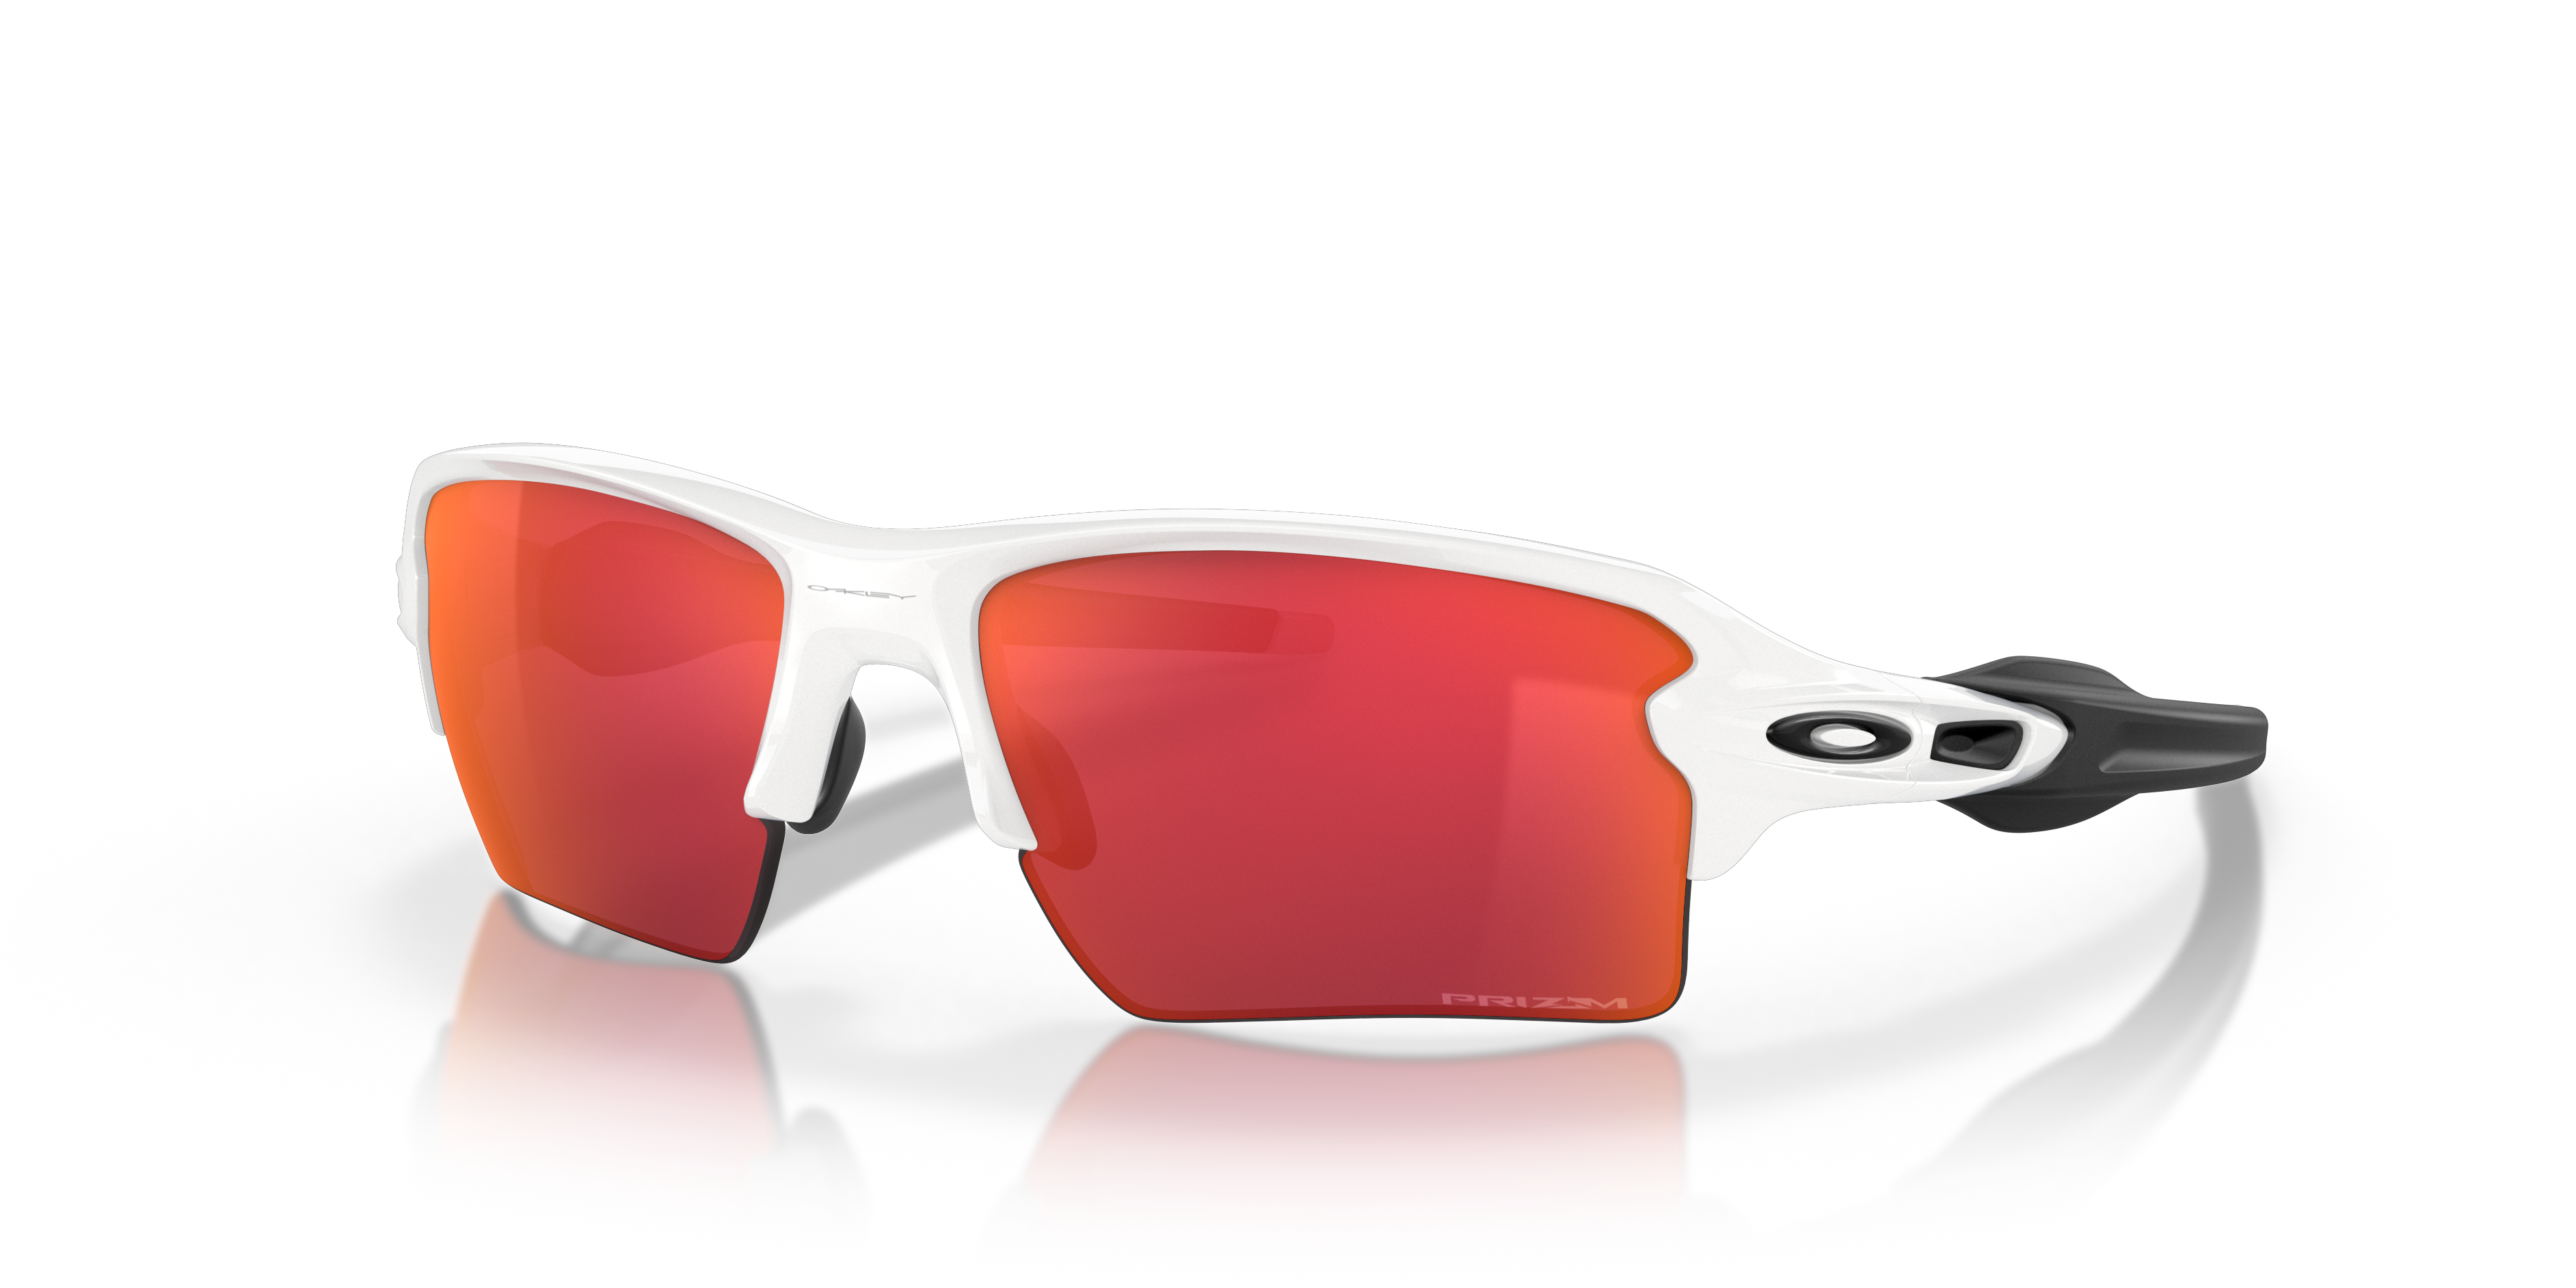 oakley red white and blue sunglasses